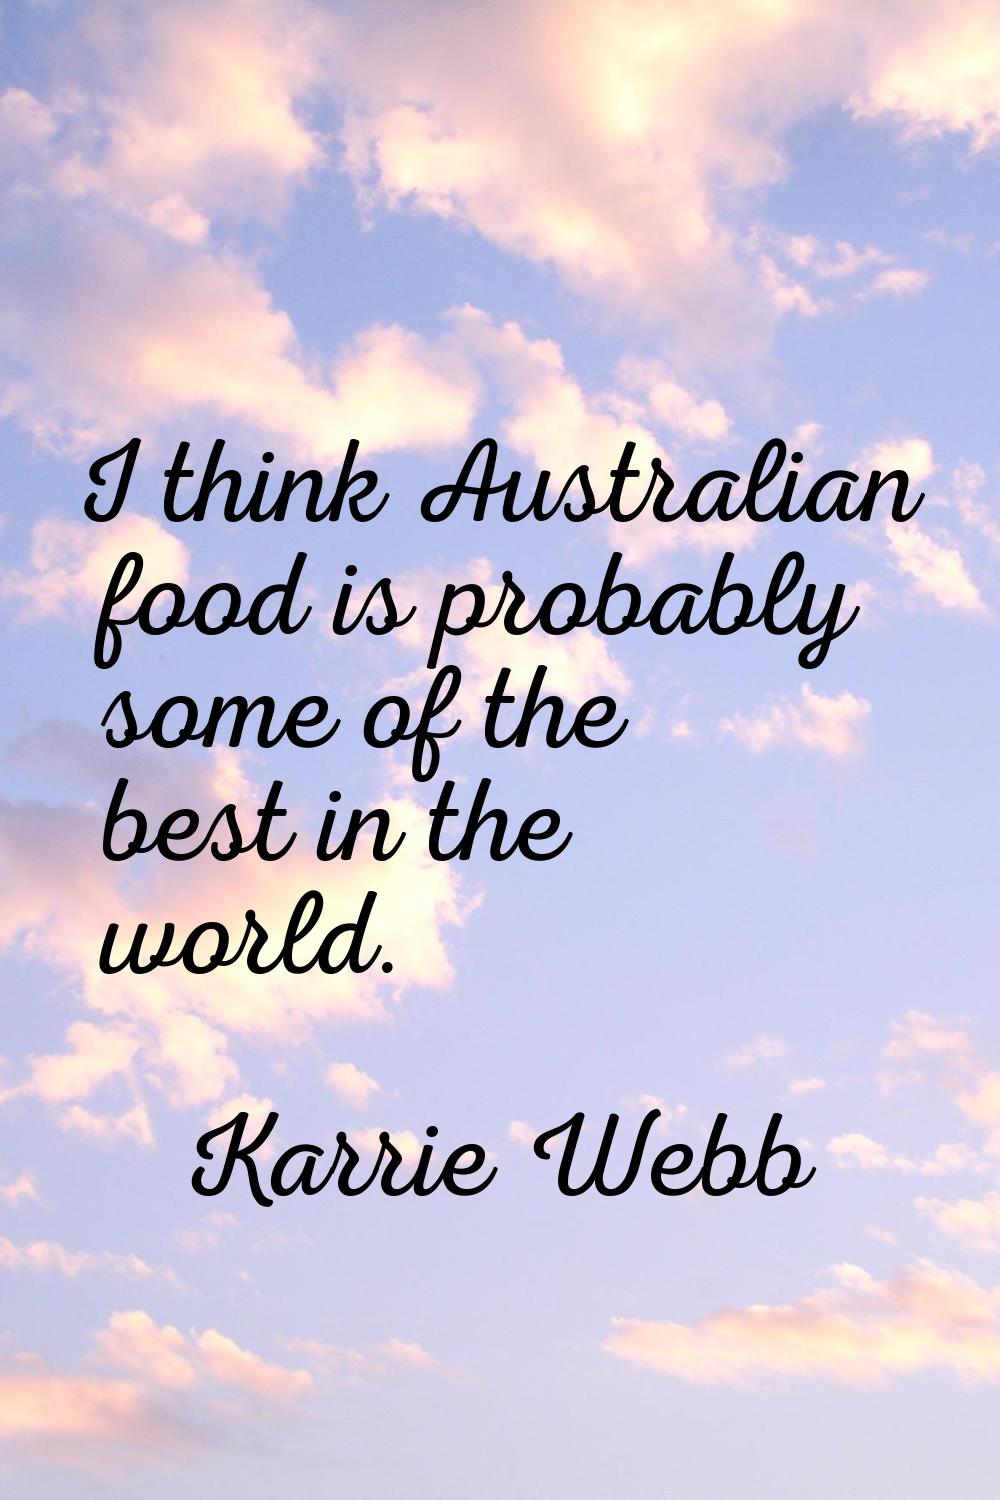 I think Australian food is probably some of the best in the world.